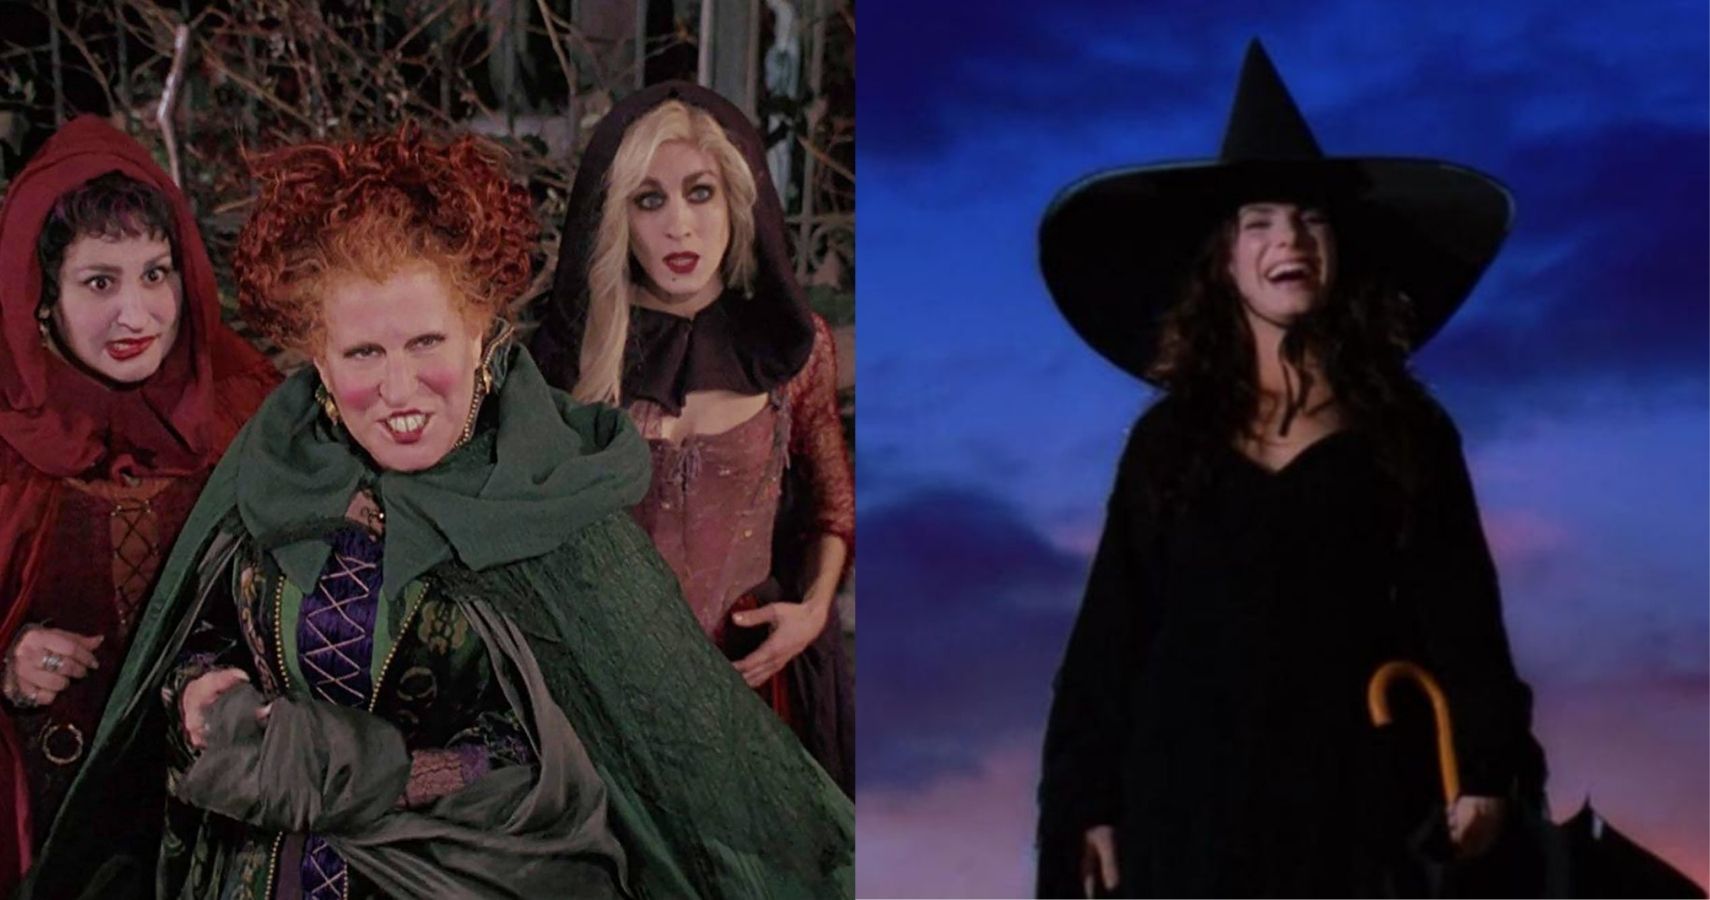 A split image features the Sanderson sisters from Hocus Pocus and Sally Owens in Practical Magic